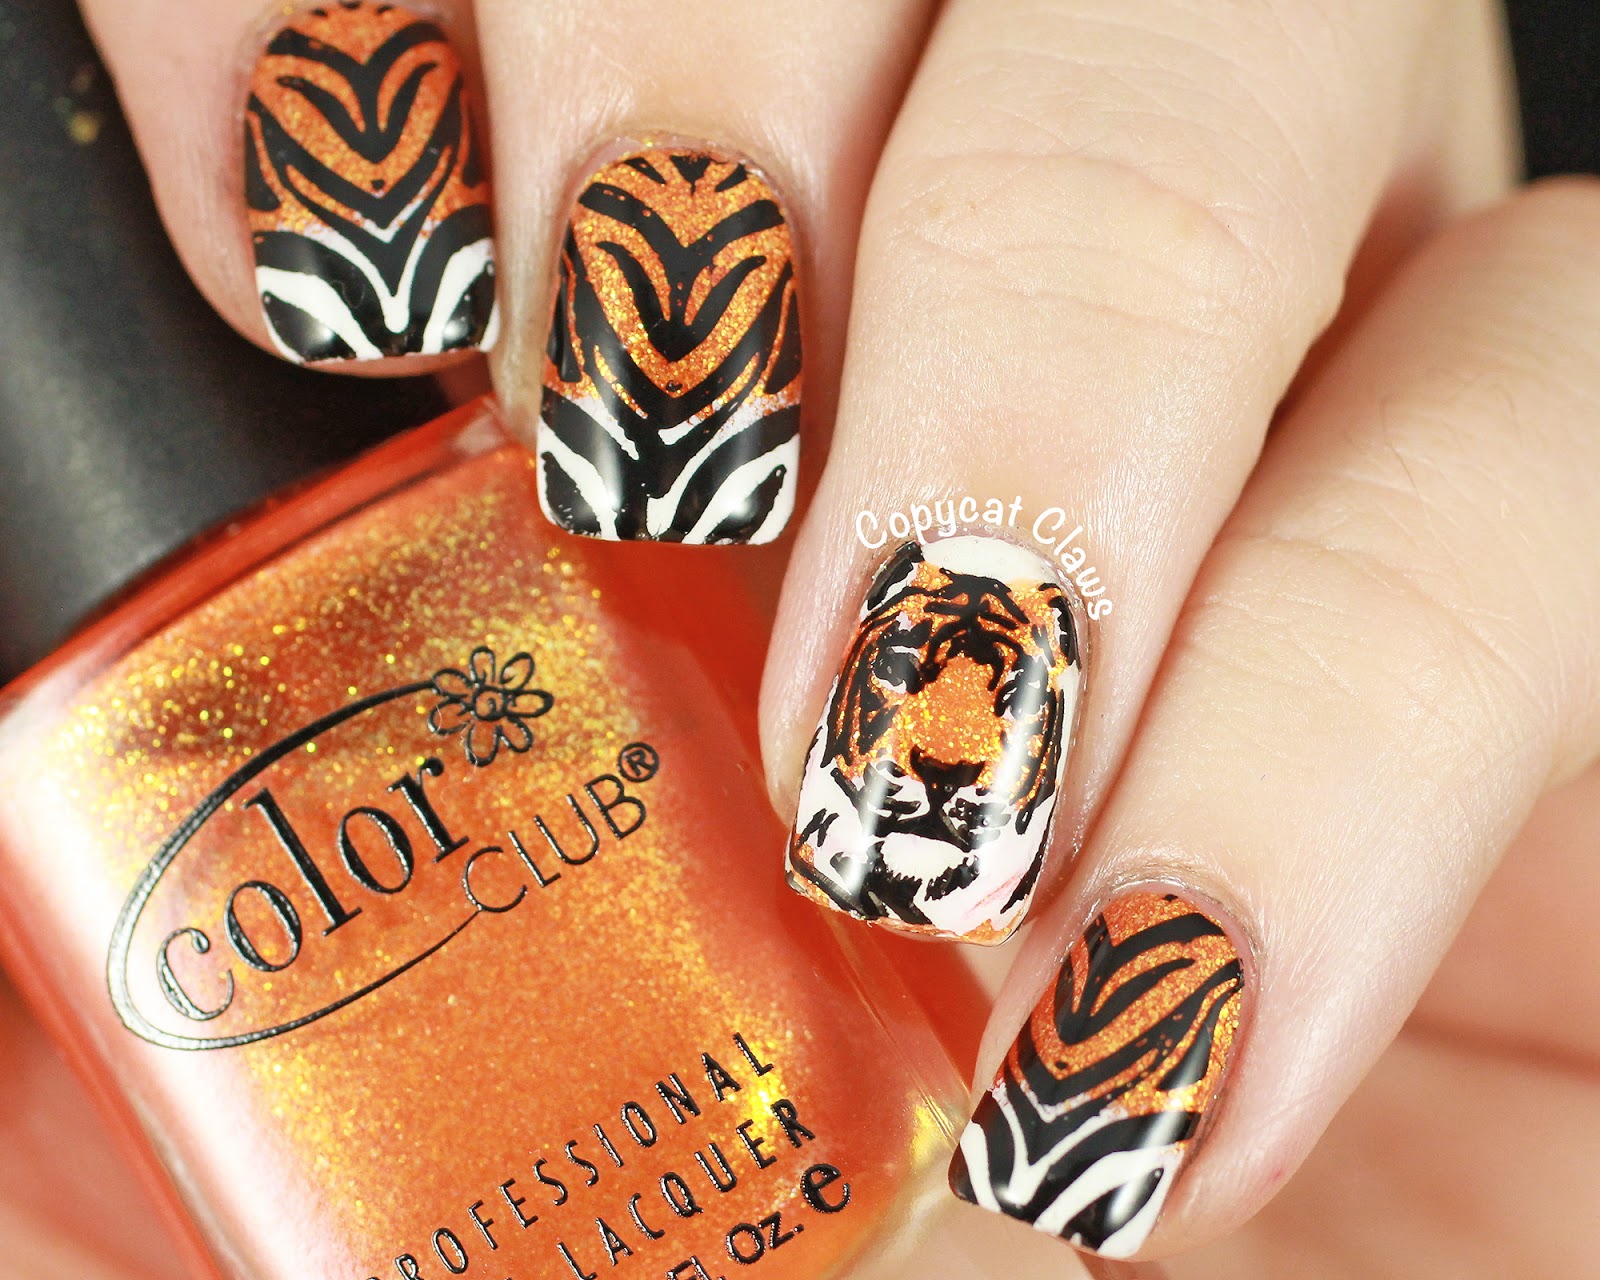 Year of the Tiger Nail Art: 10 Ideas for a Fierce Manicure - wide 7